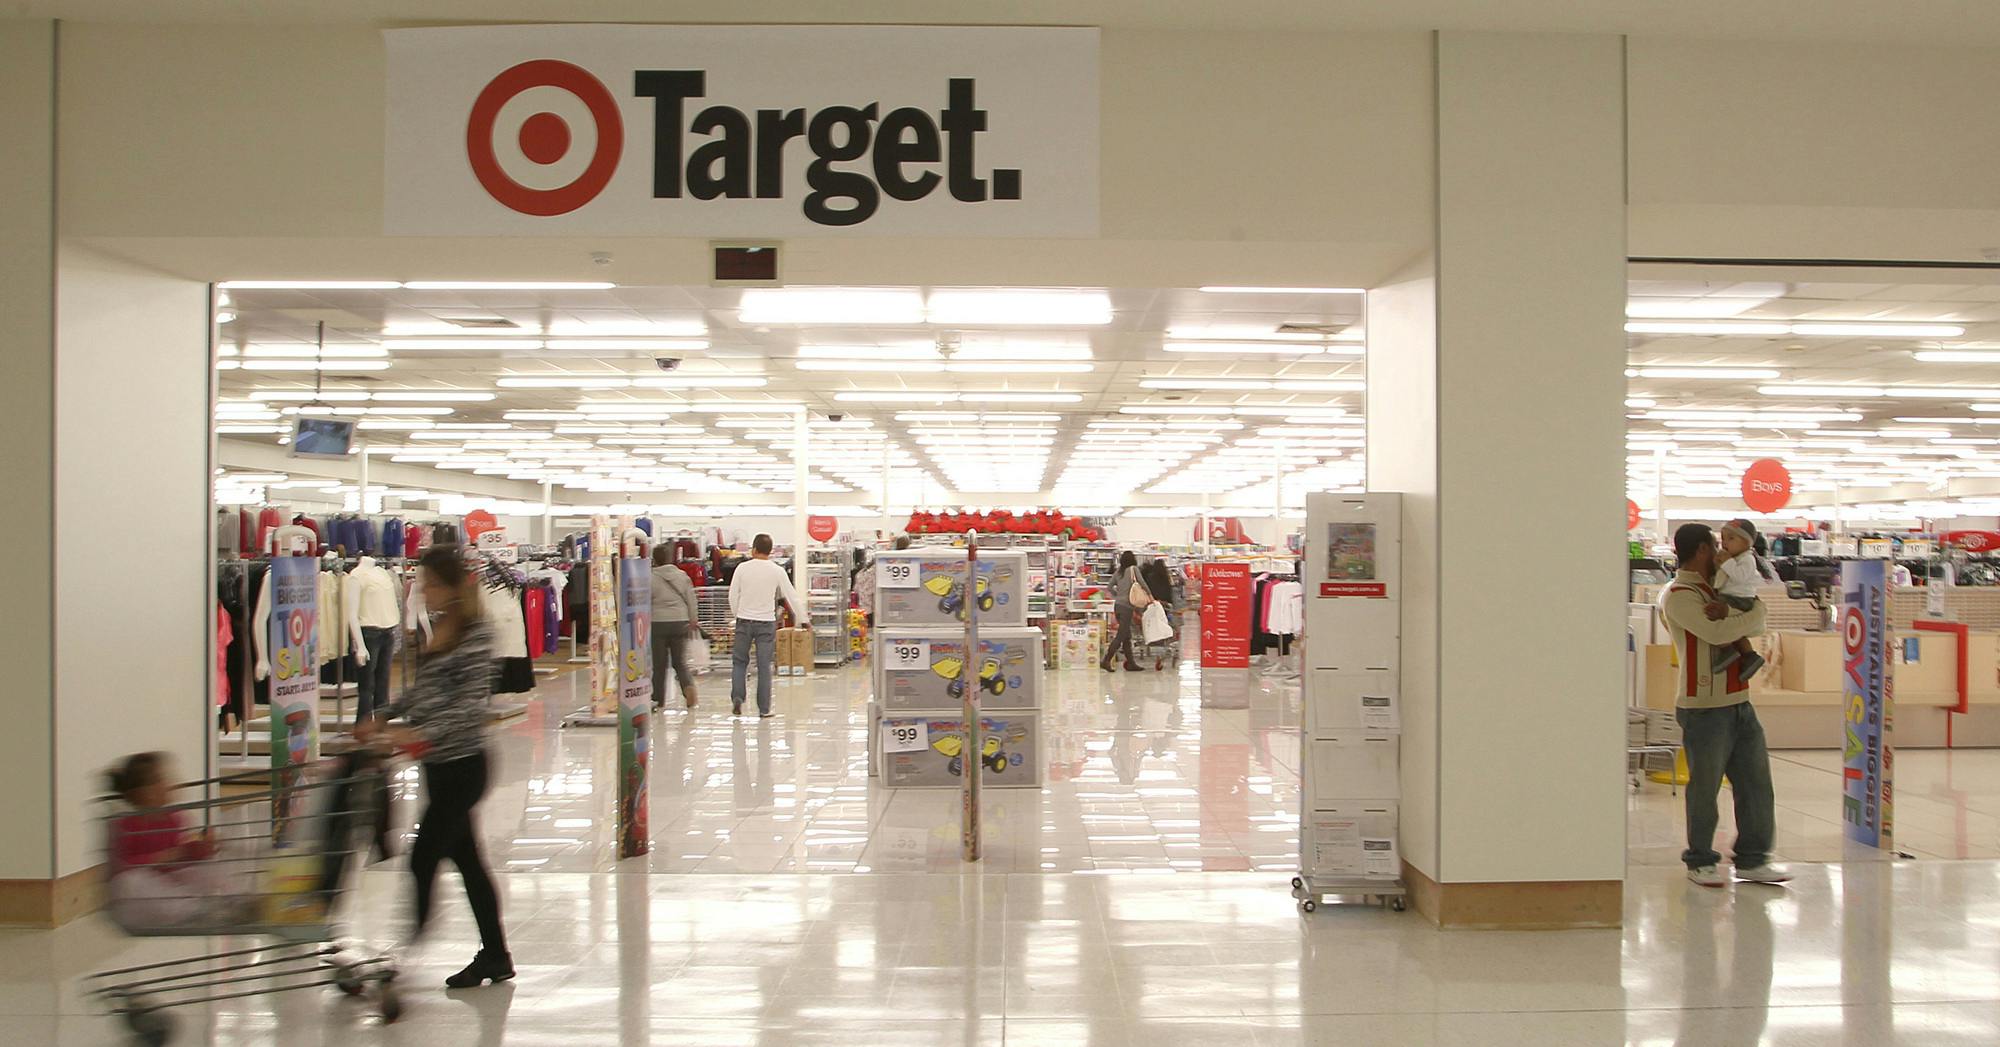 Target has a twin in Australia, but they're not related